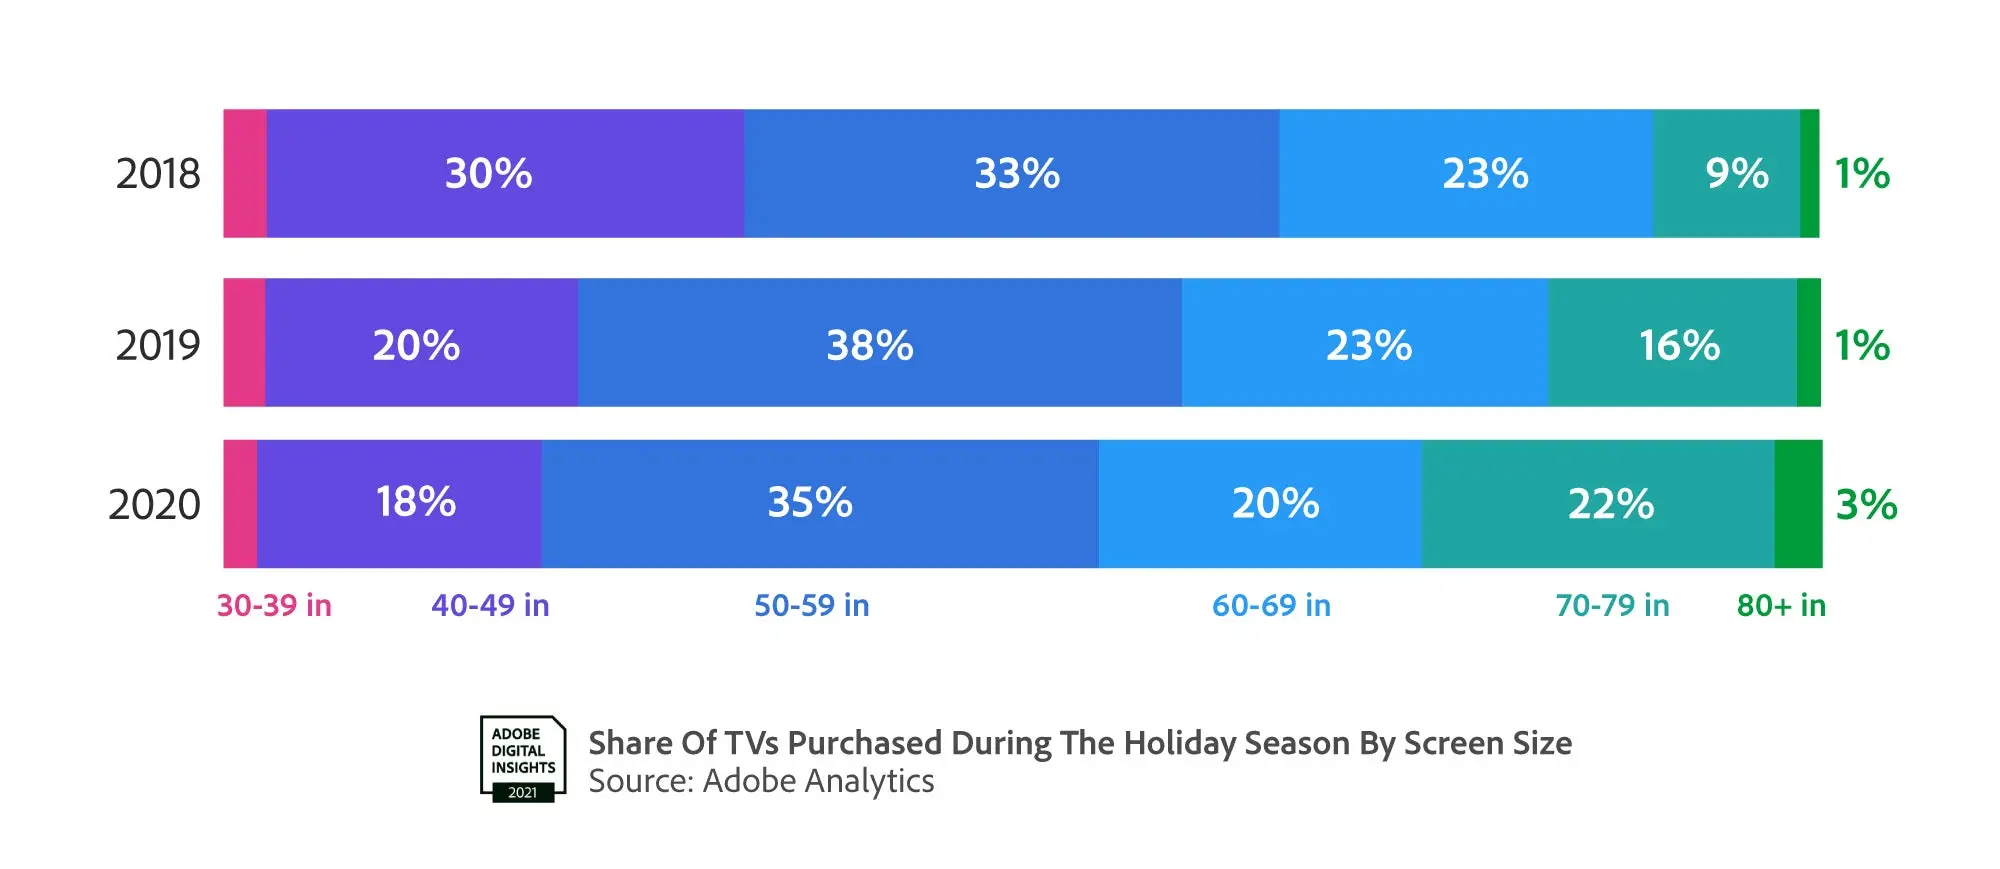 Graph showing the share of TV's purchased during the holiday season by screen size. 